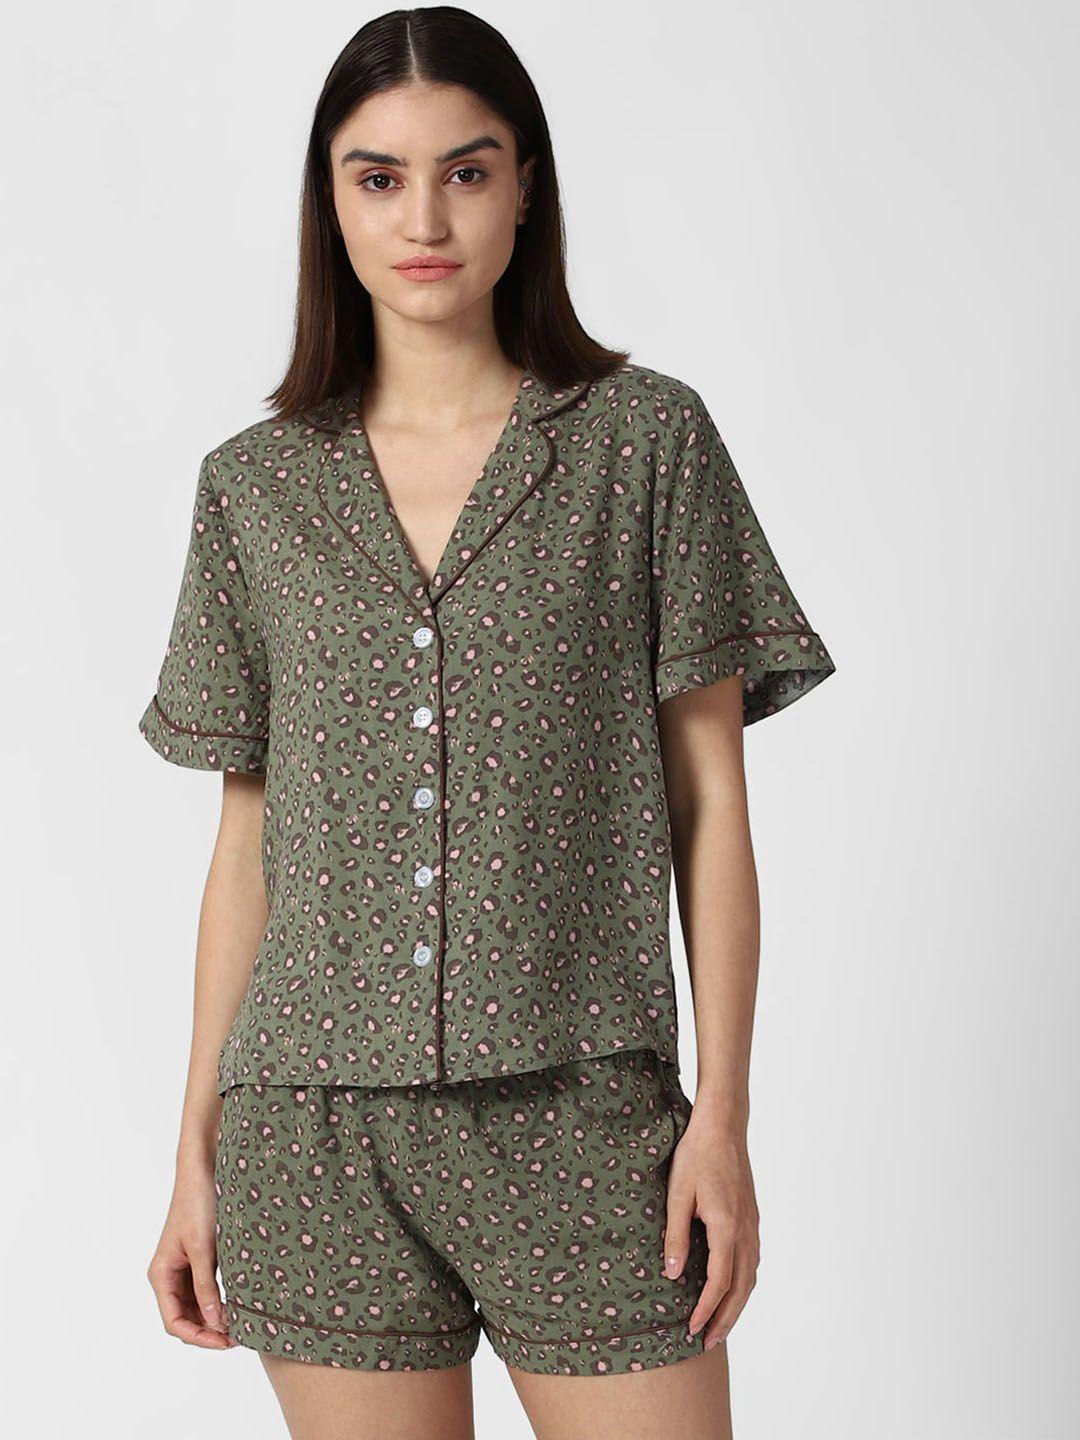 forever 21 women olive green printed night suit